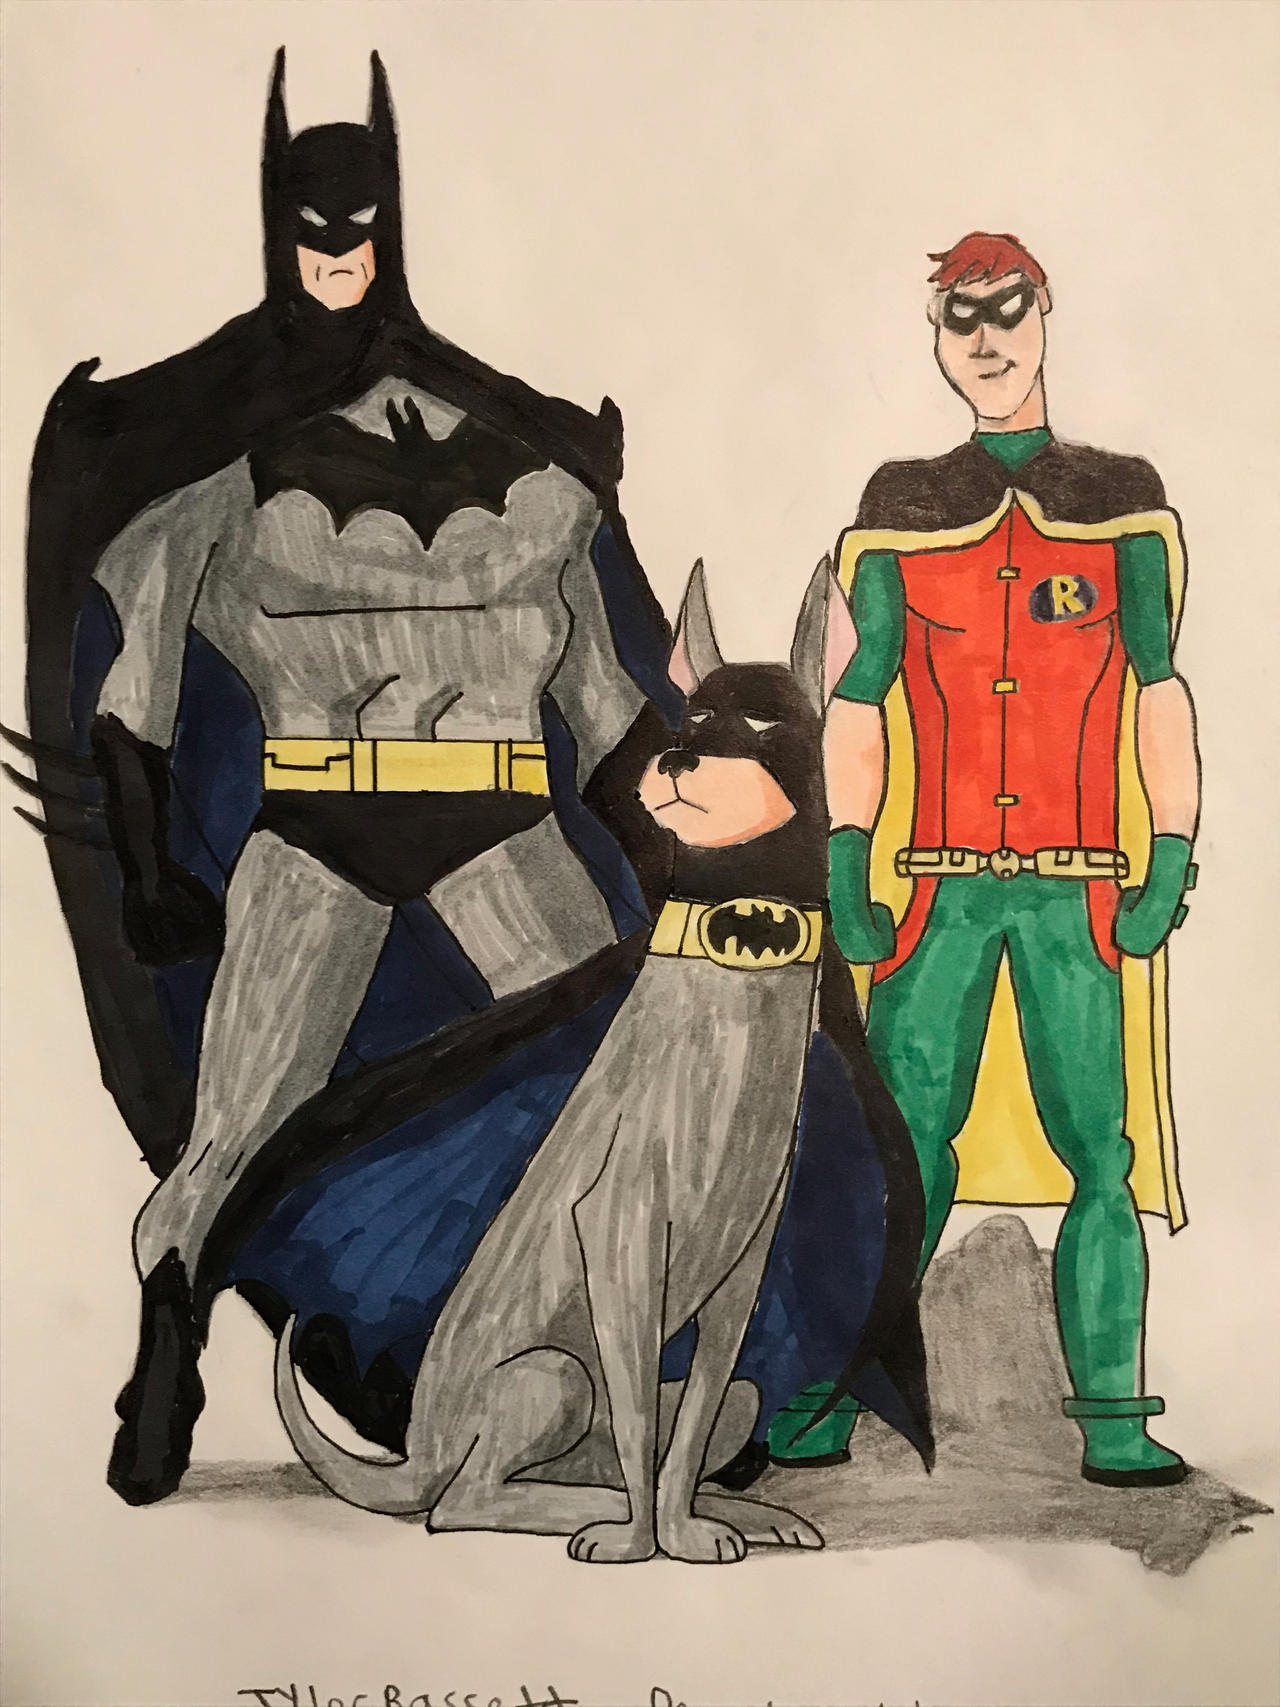 Ace the Bat hound with Batman and Robin by tybsssett on DeviantArt